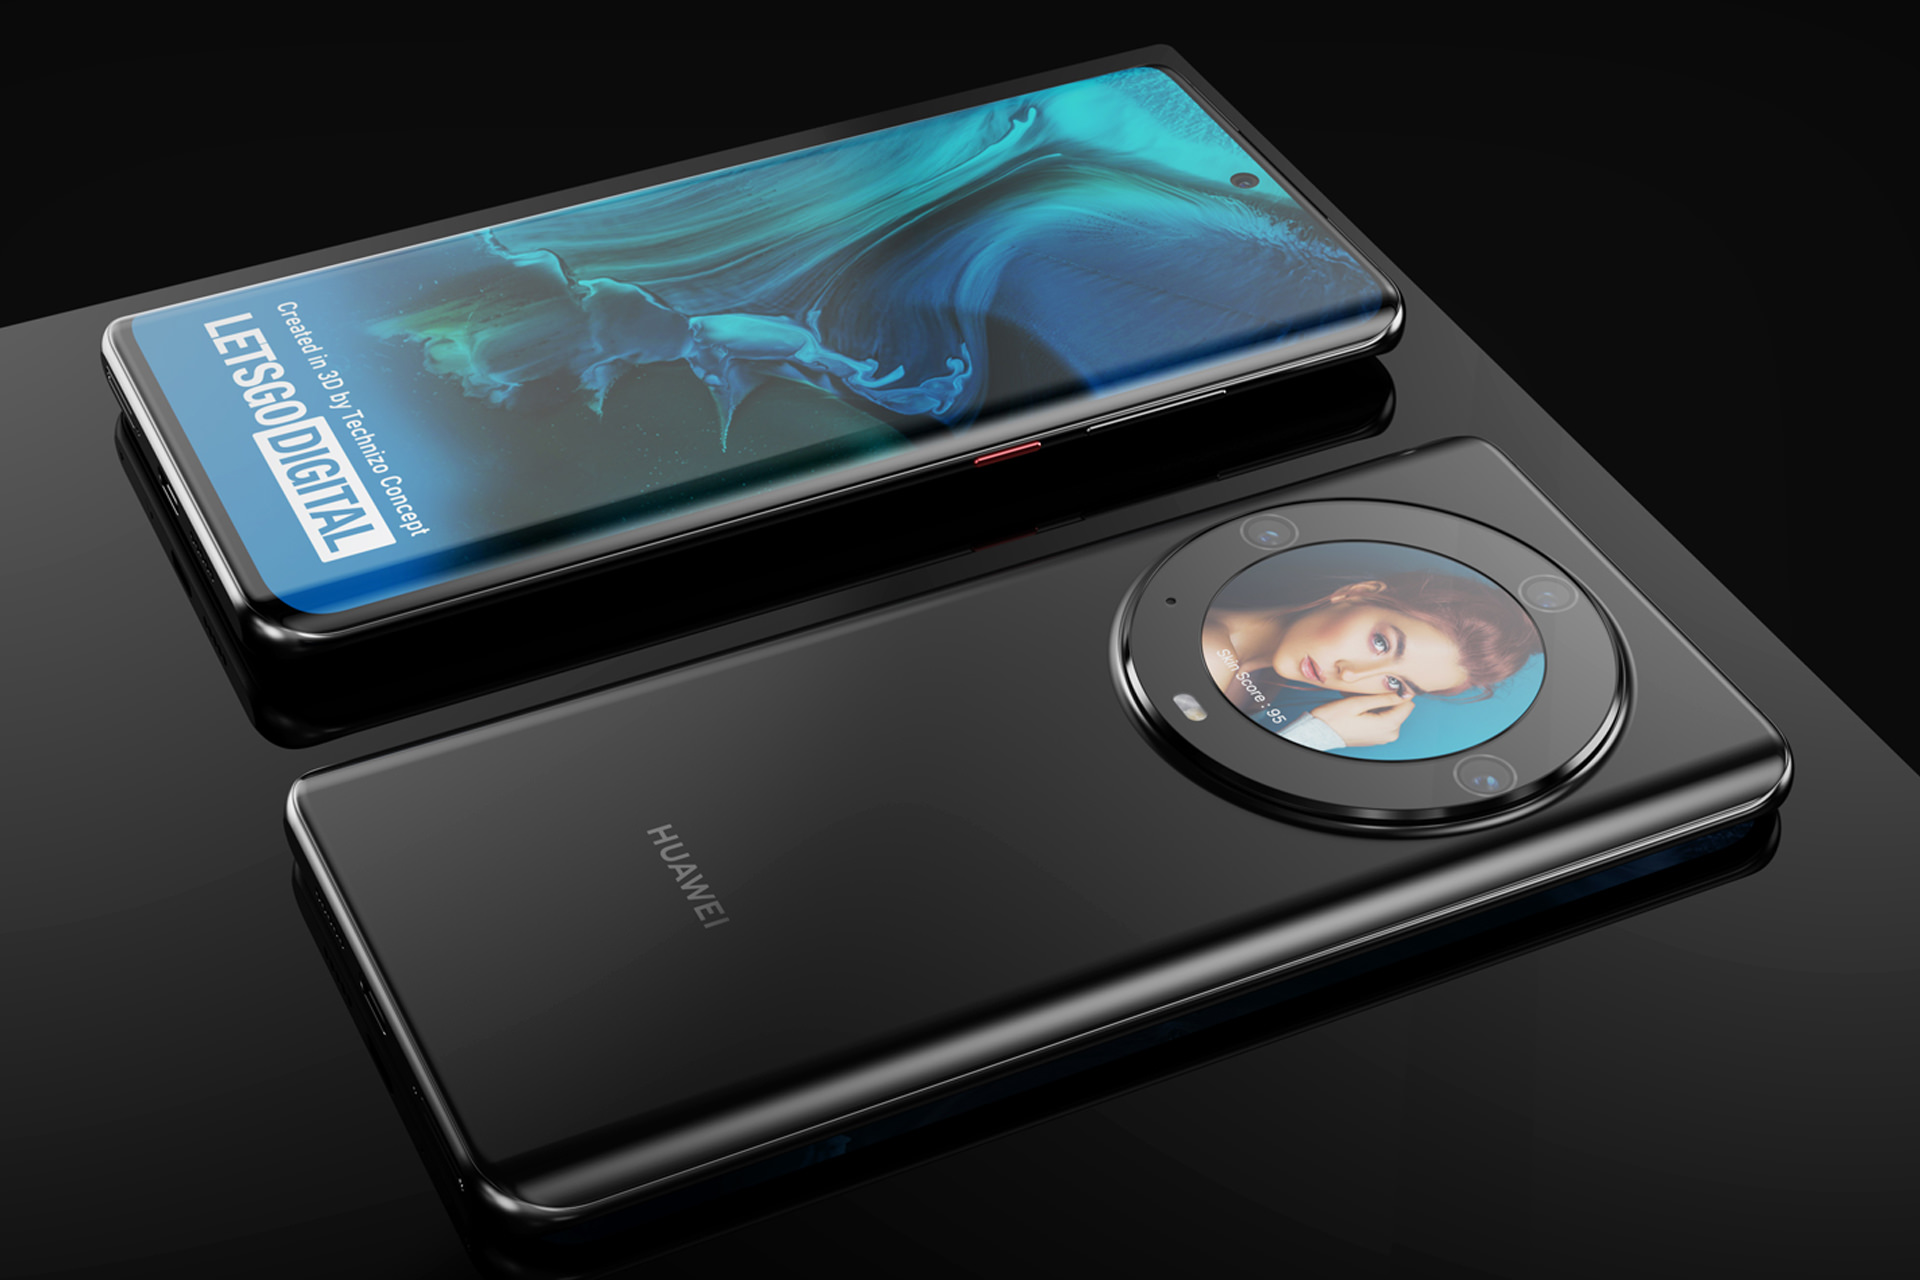 Huawei concept phone with 3D camera